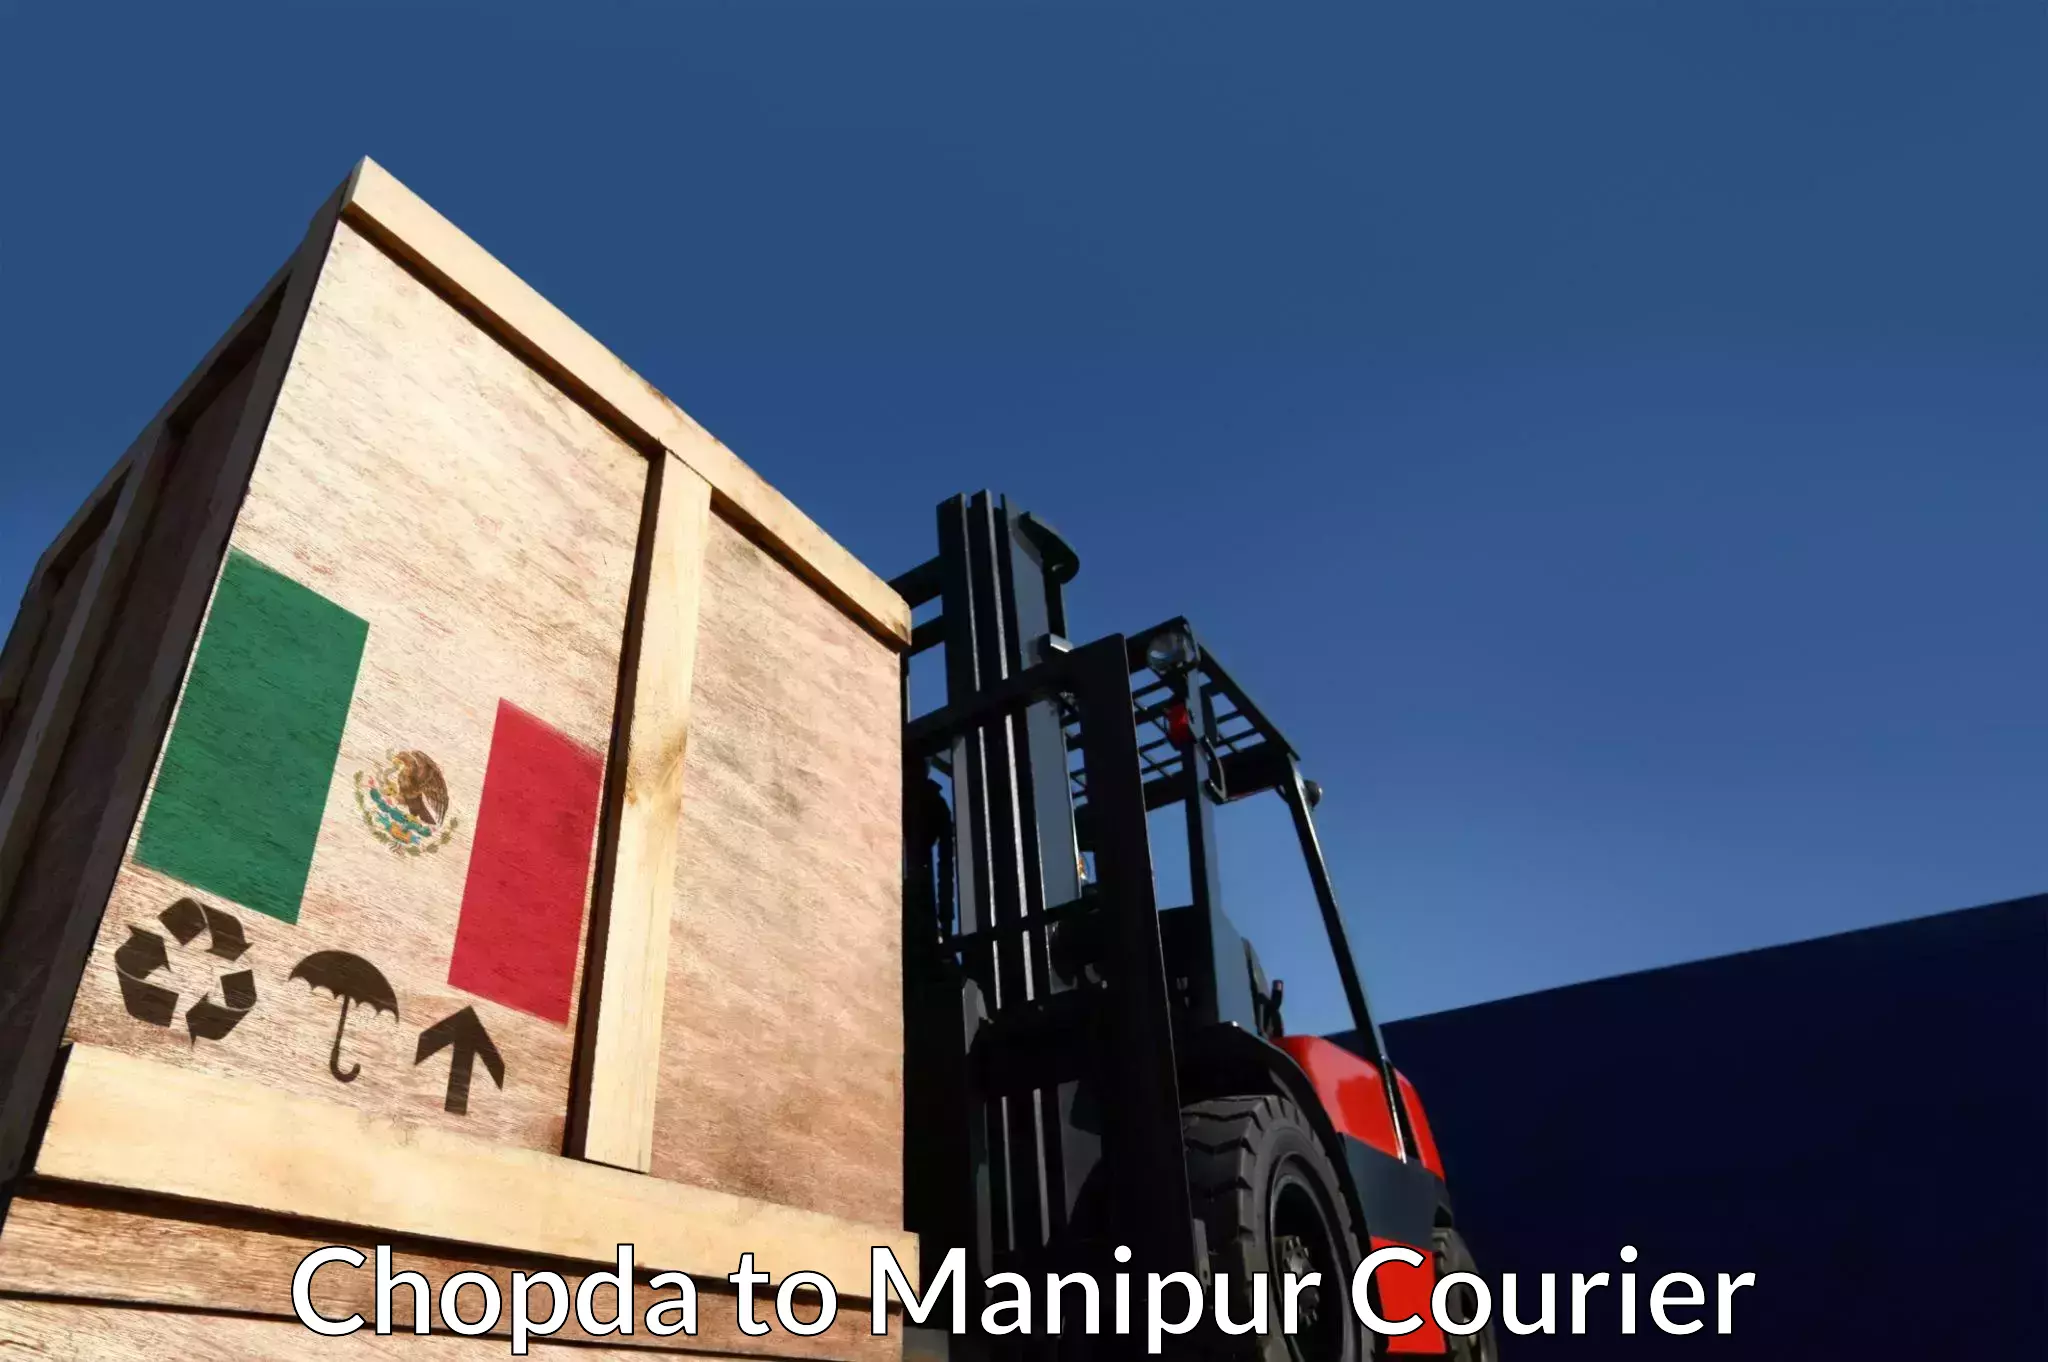 Reliable logistics providers Chopda to Manipur